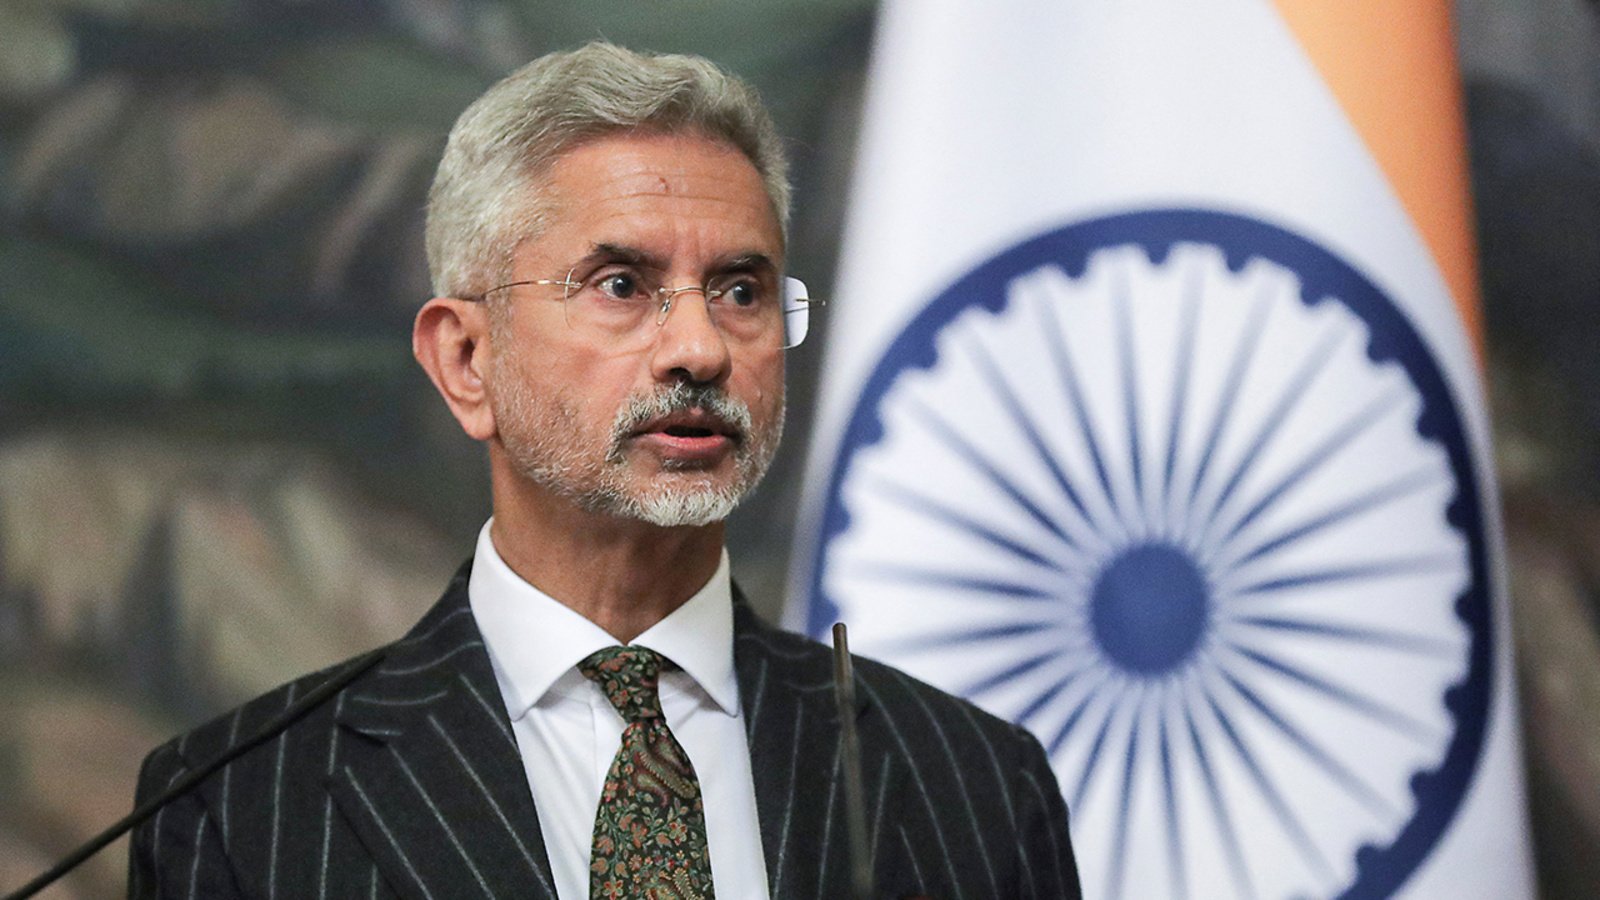 Africa Will Continue To Be At India’s Top Priorities: S Jaishankar